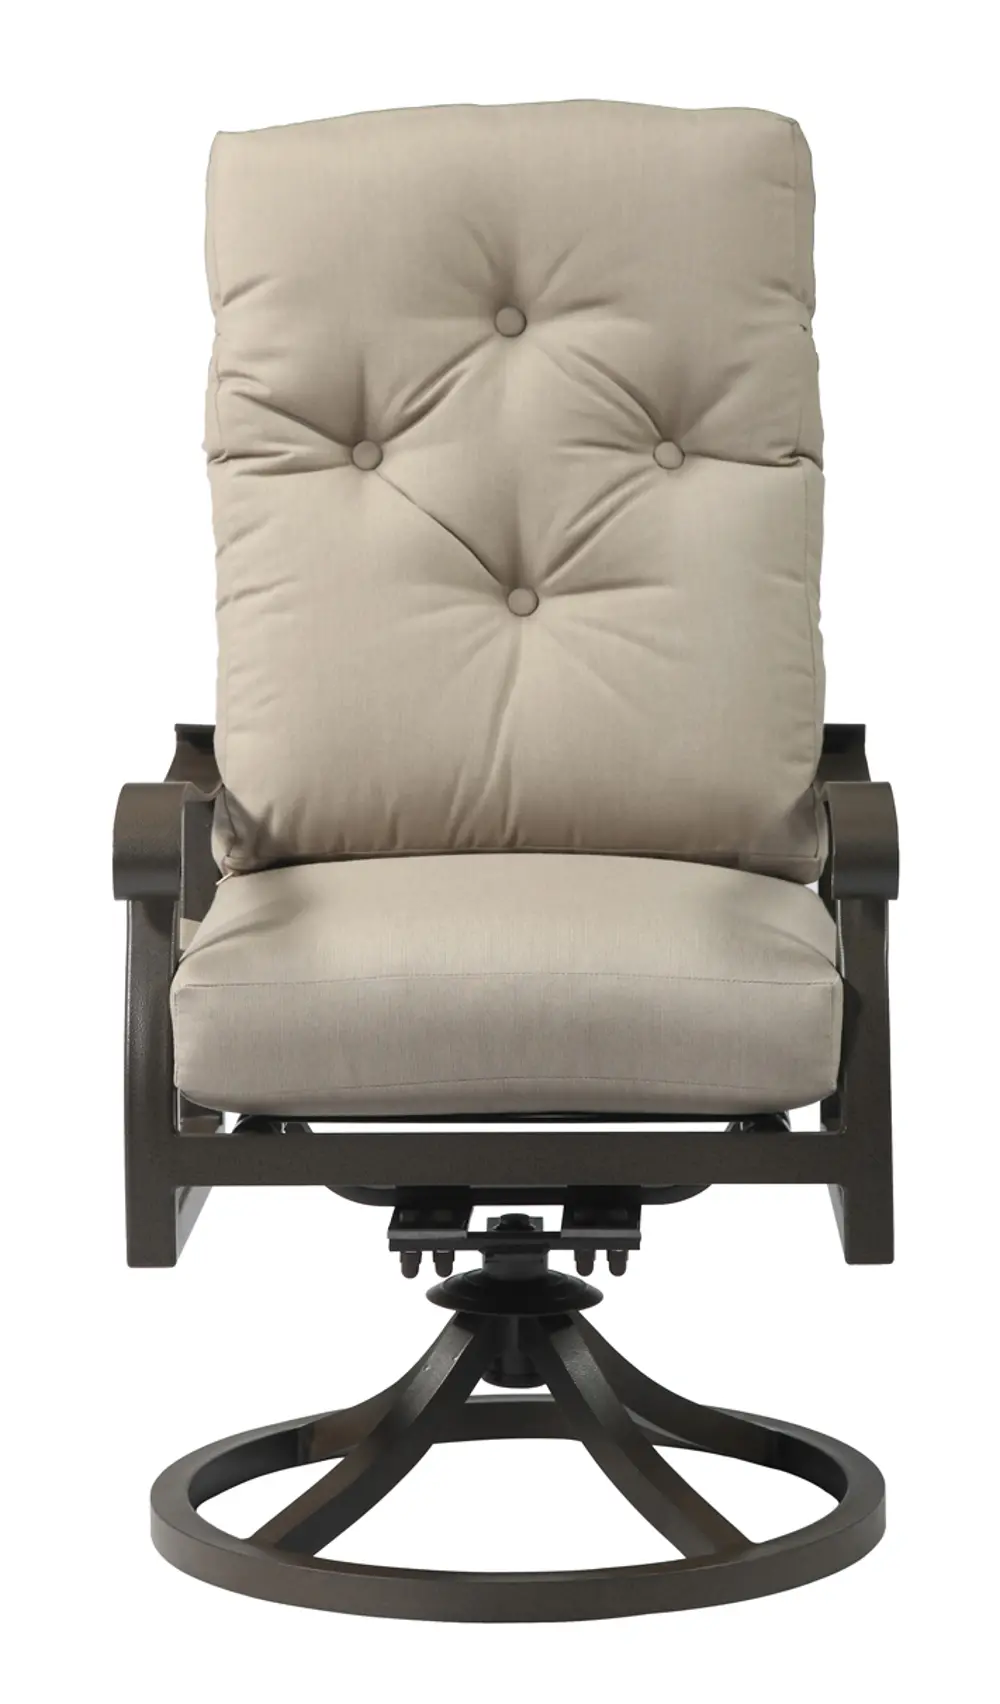 Outdoor Patio Swivel Chair - Chatham-1